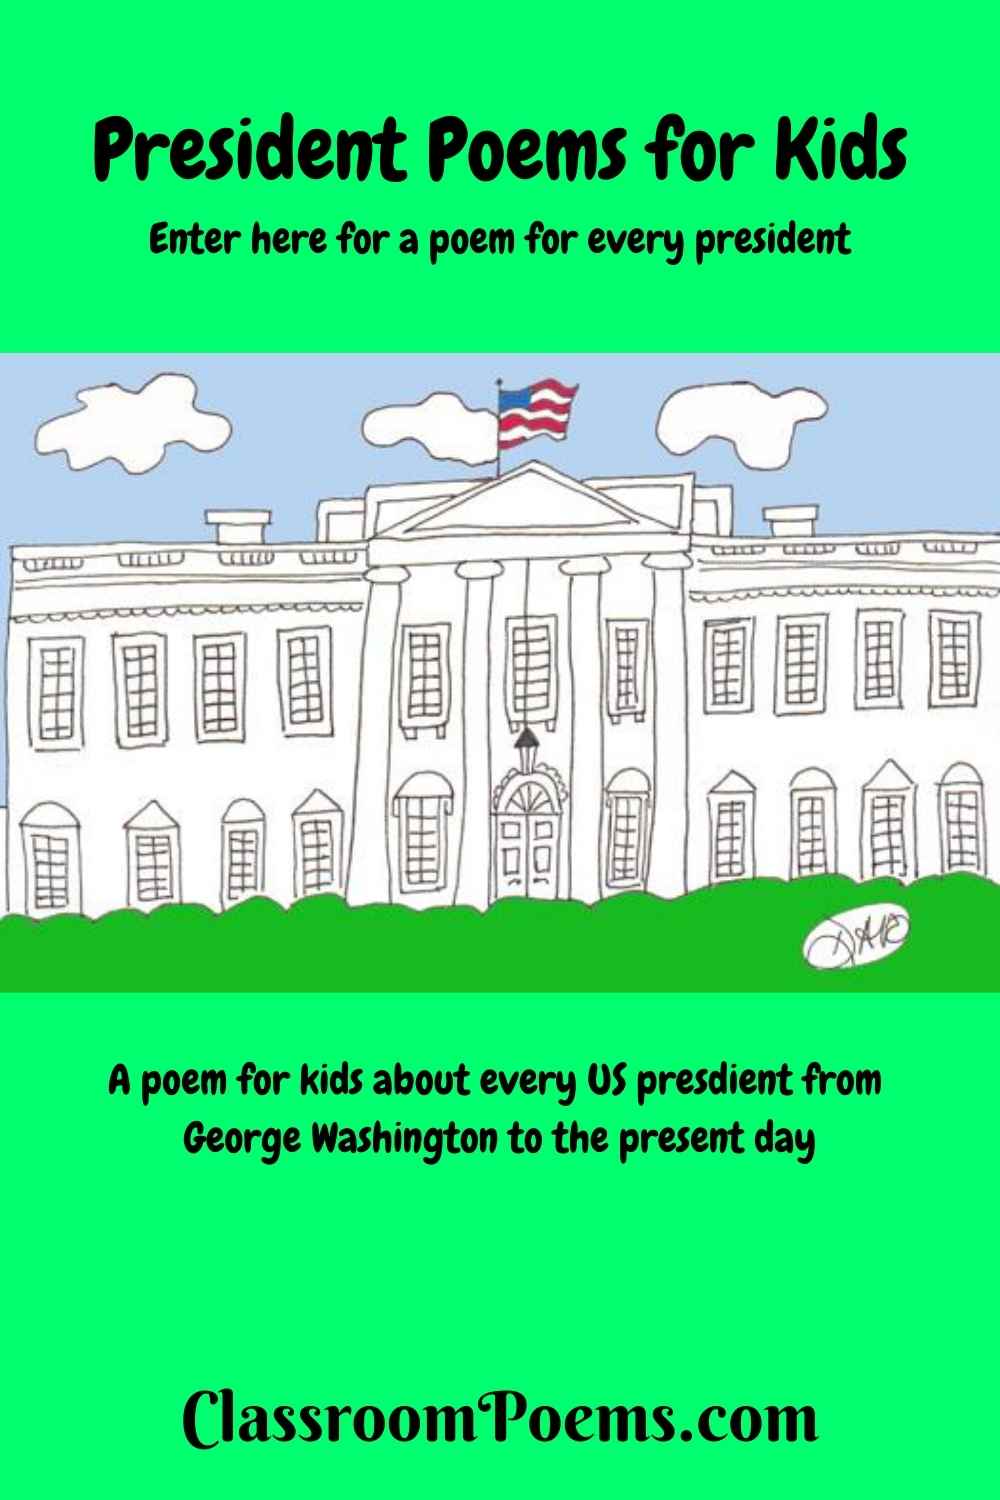 US President poems by Denise Rodgers on ClassroomPoems.com.